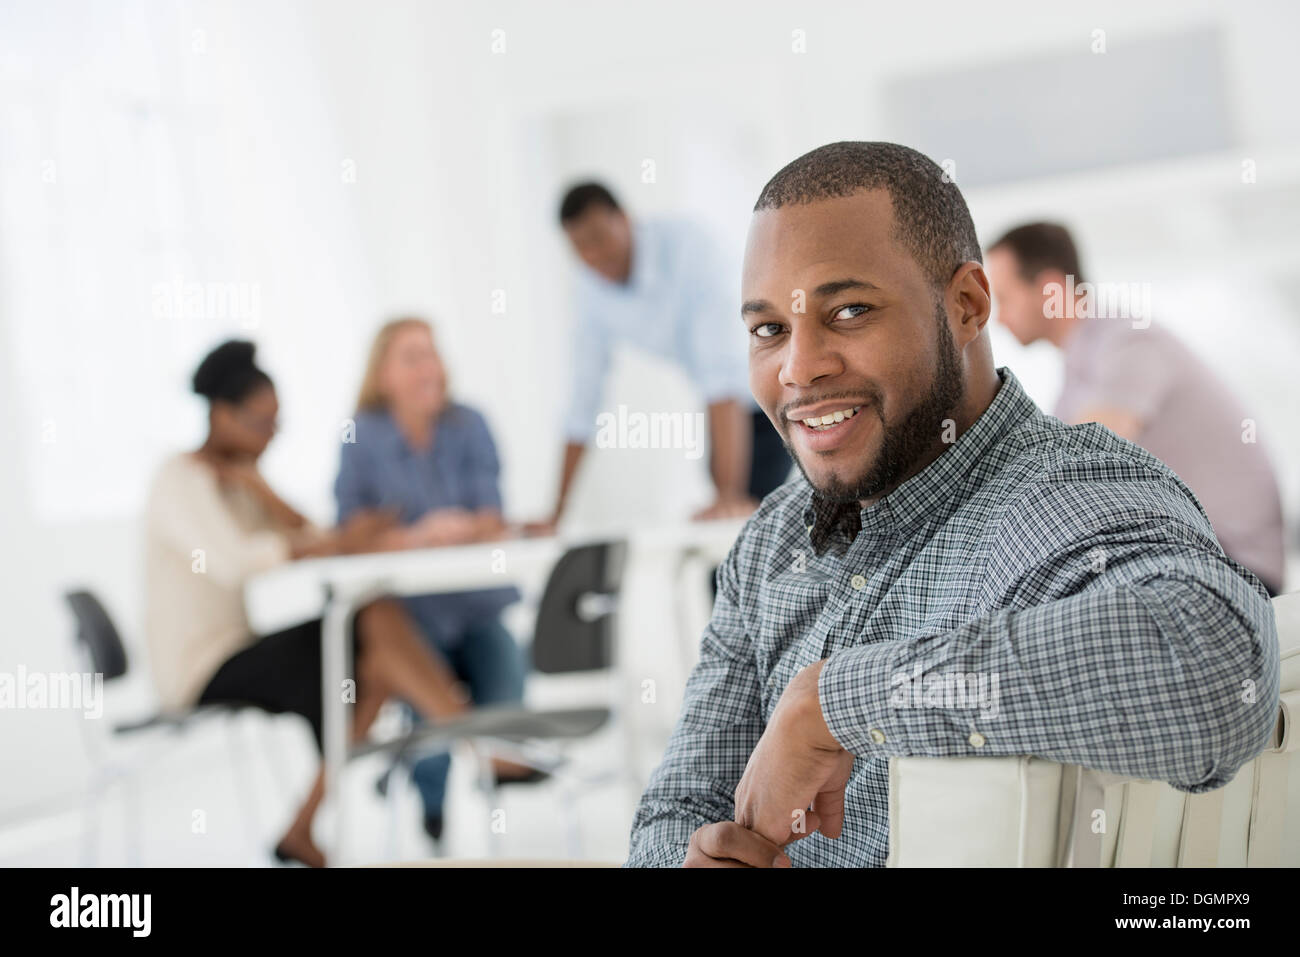 Office interior. Meeting. One person looking over her shoulder and away from the group. Stock Photo